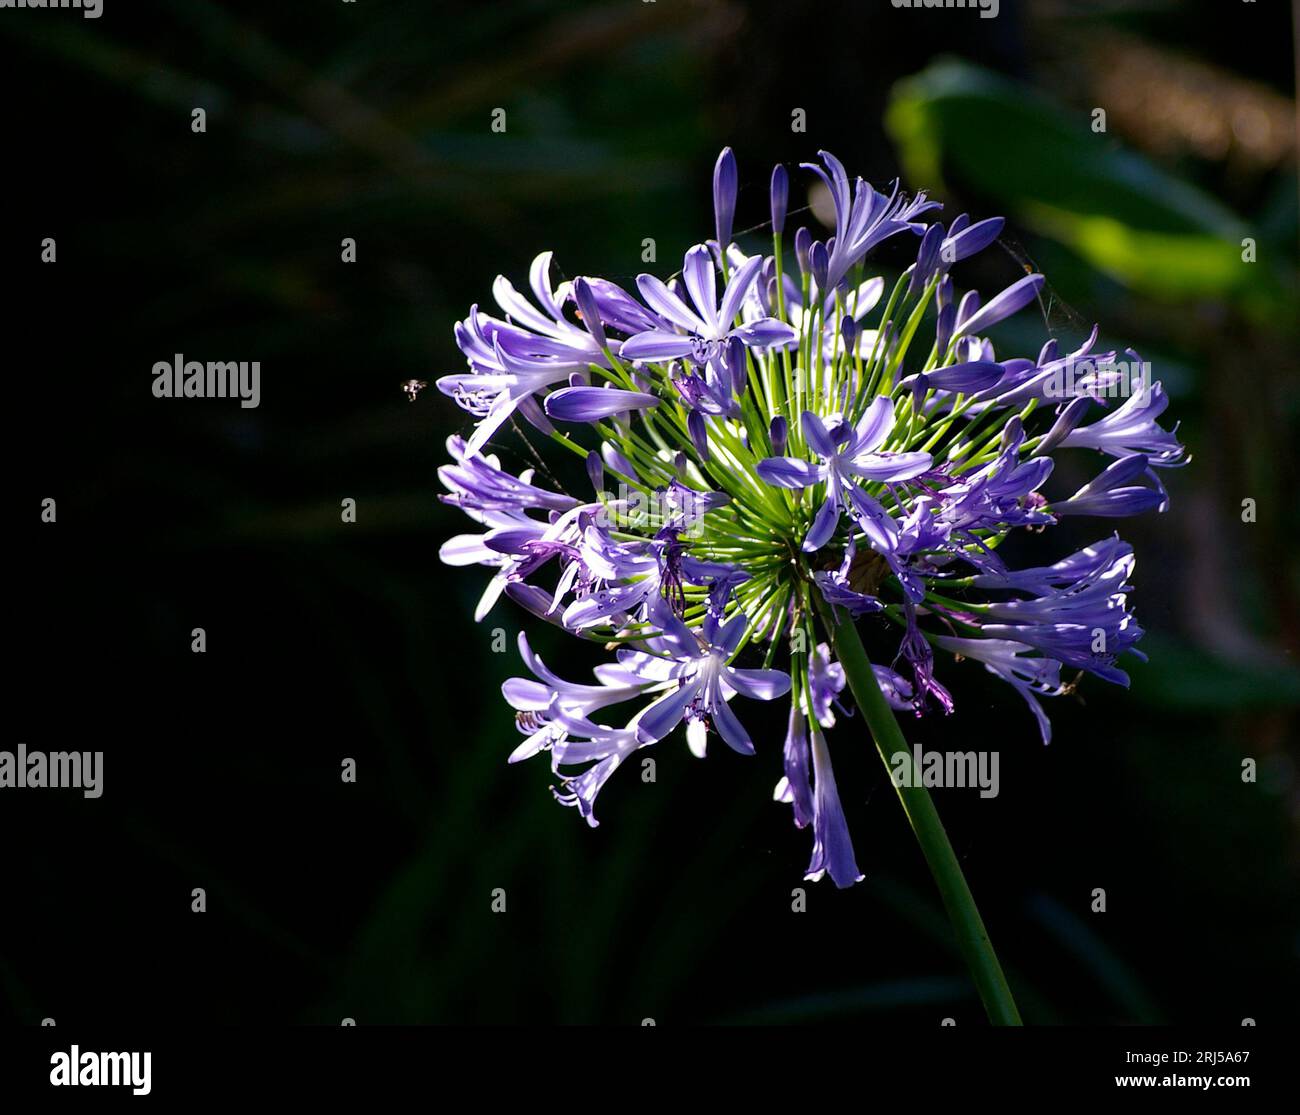 Single round head of Agapanthus Blue flowers, Agapanthus praecox, native to Africa, in Australian garden. Black background, copy space. Stock Photo